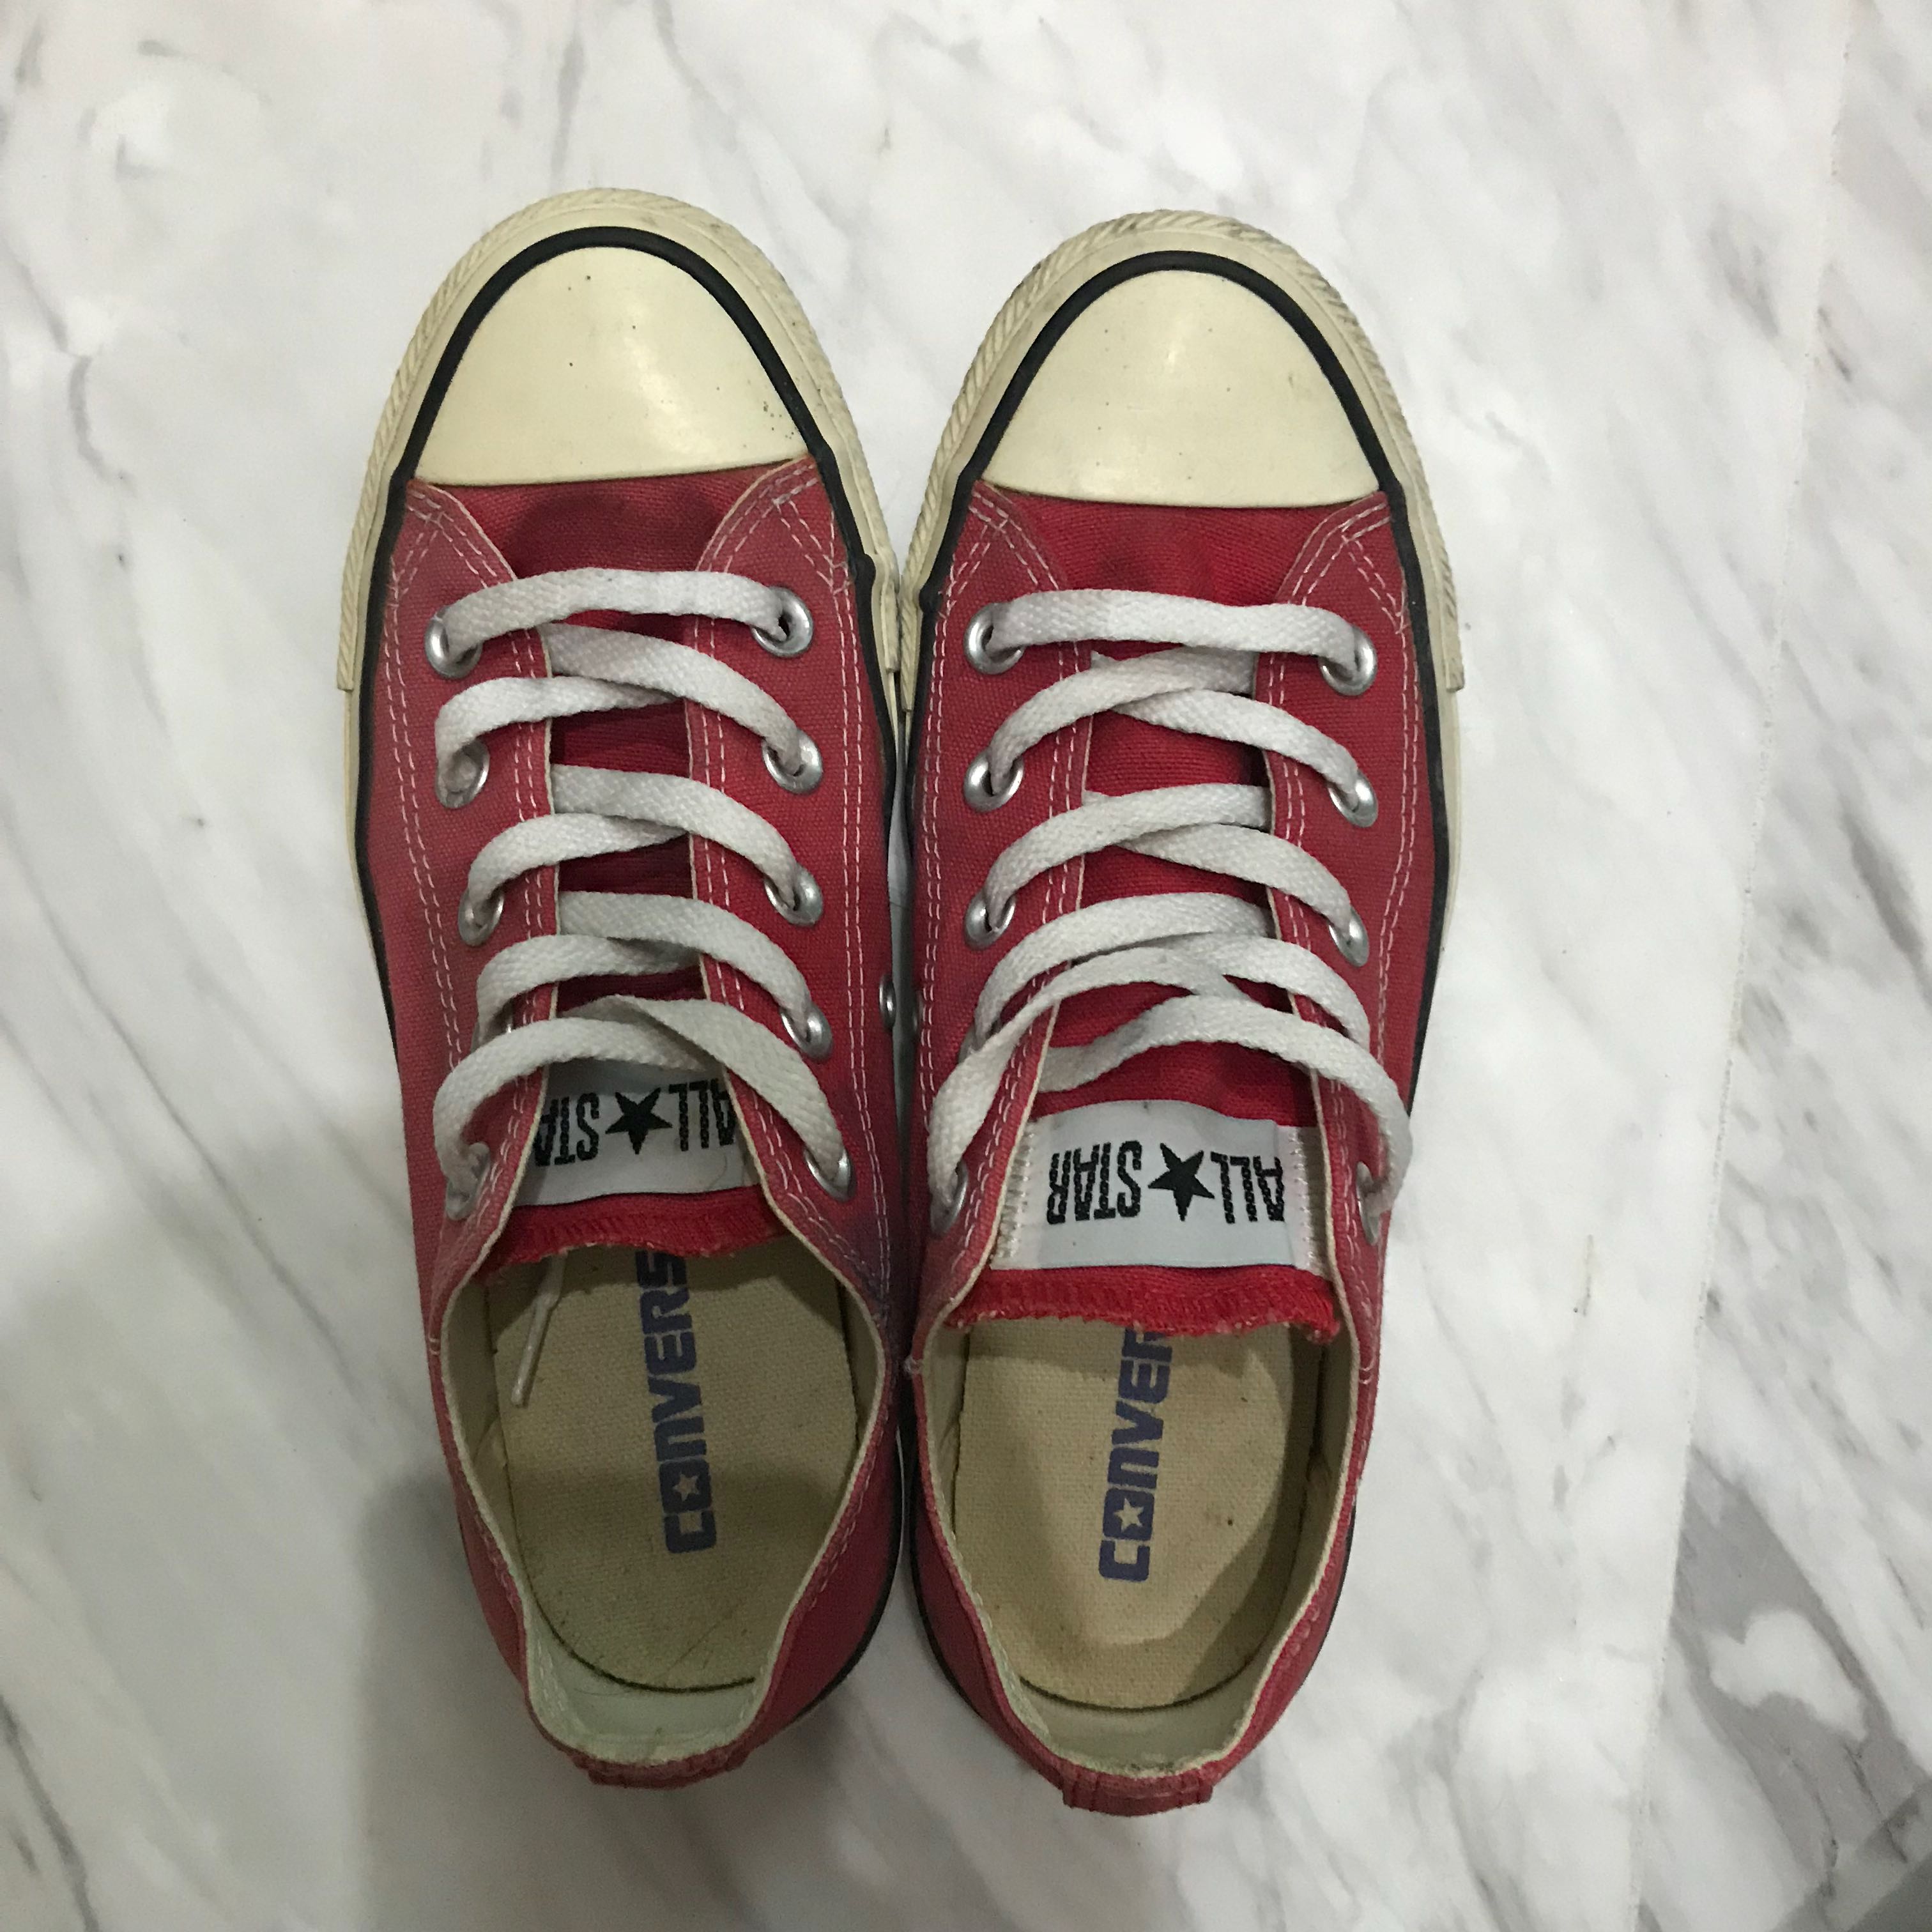 Converse all star red sneakers, Women's 